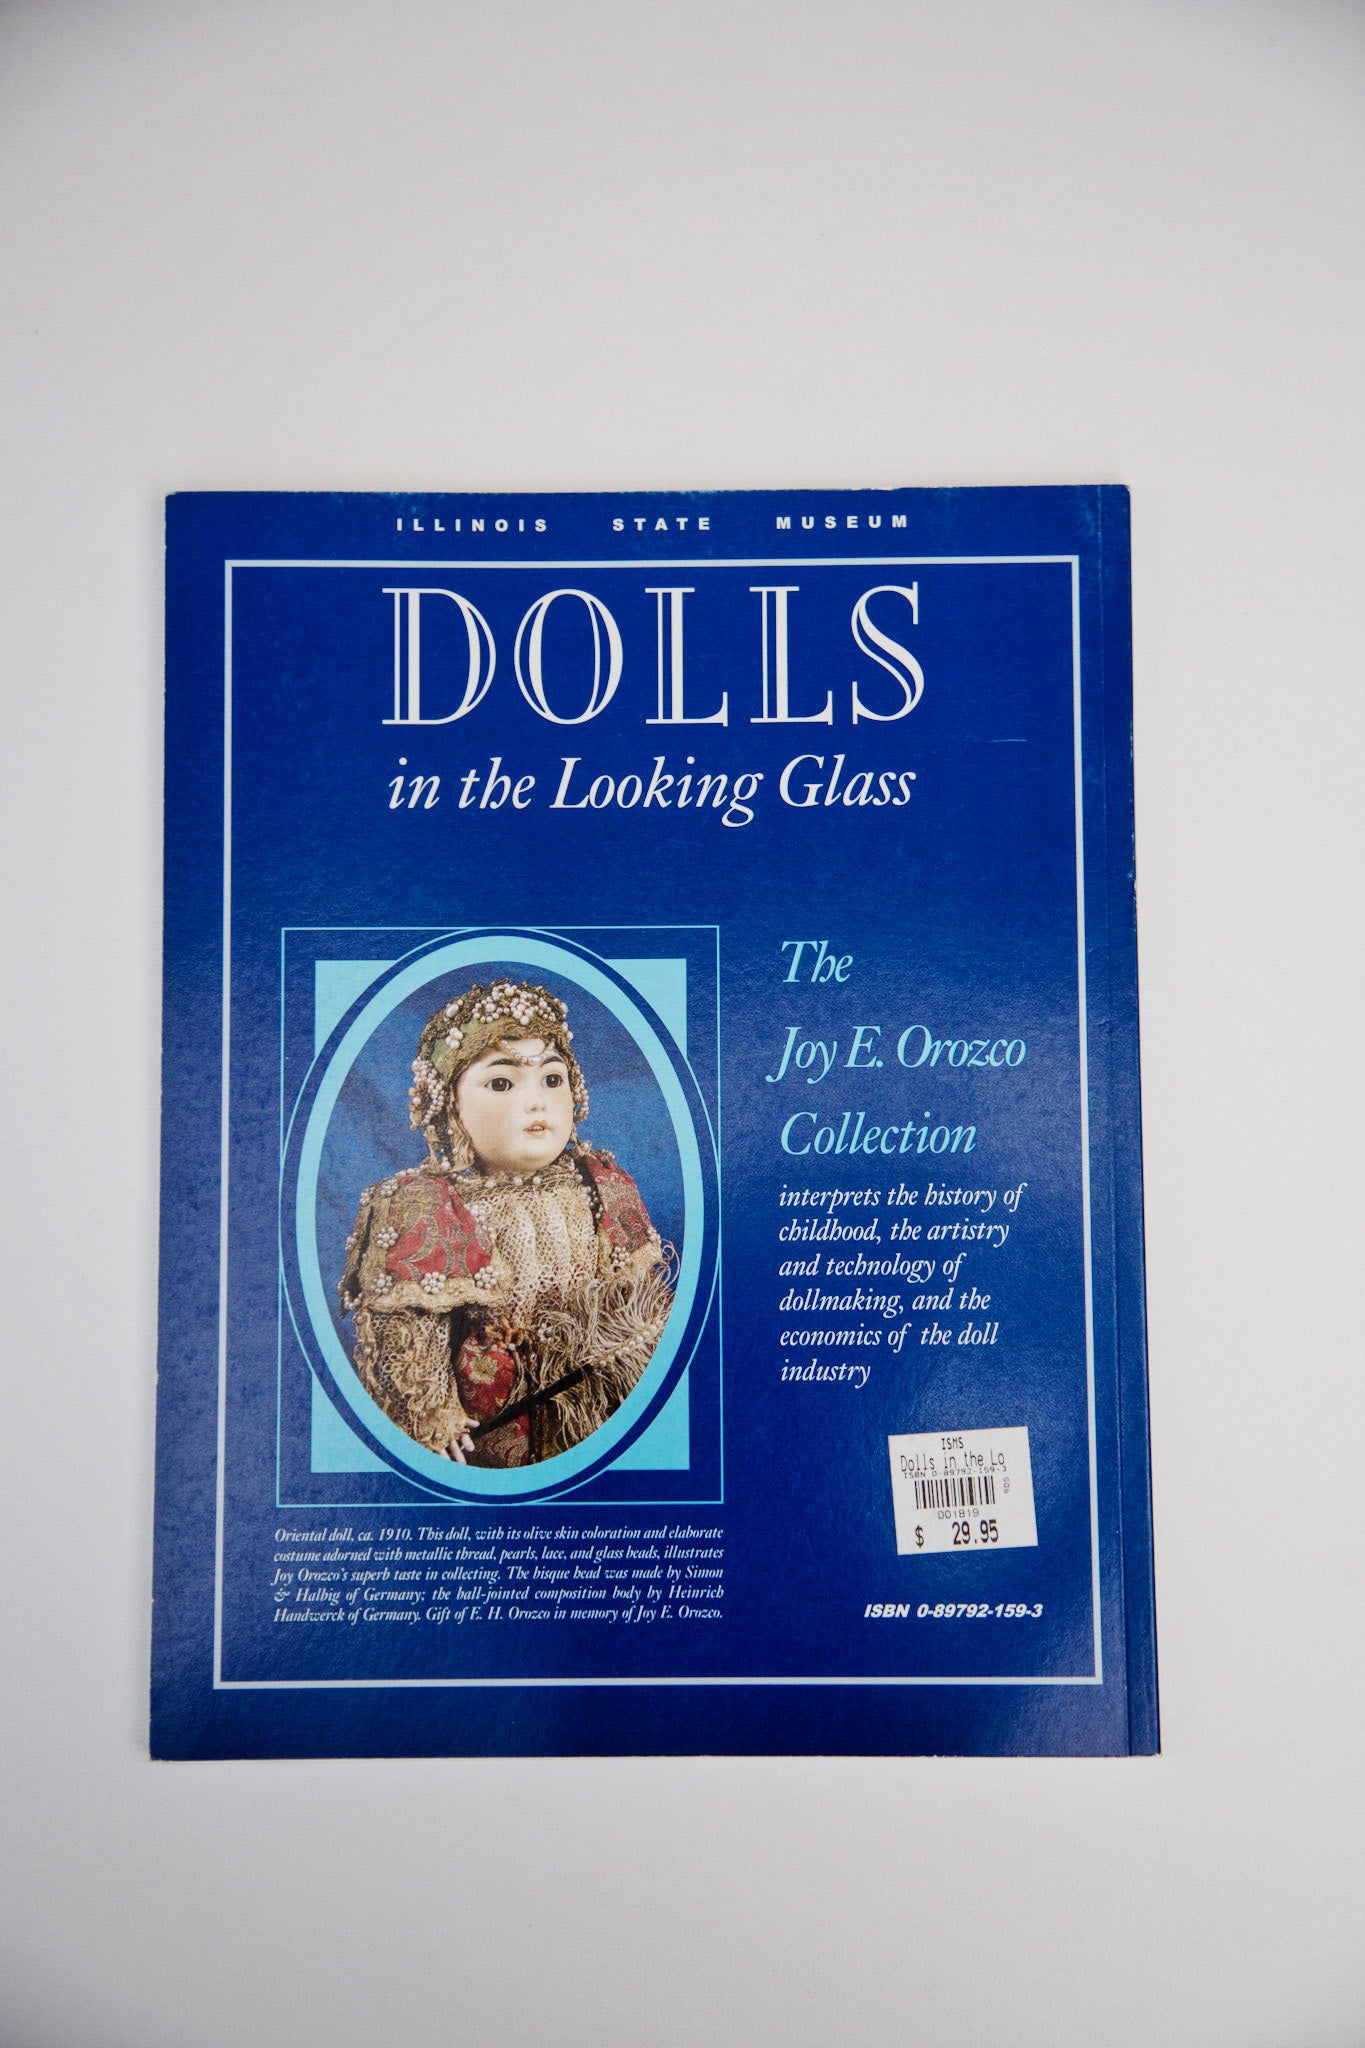 Photo of the back cover of the book “Dolls in the Looking Glass”